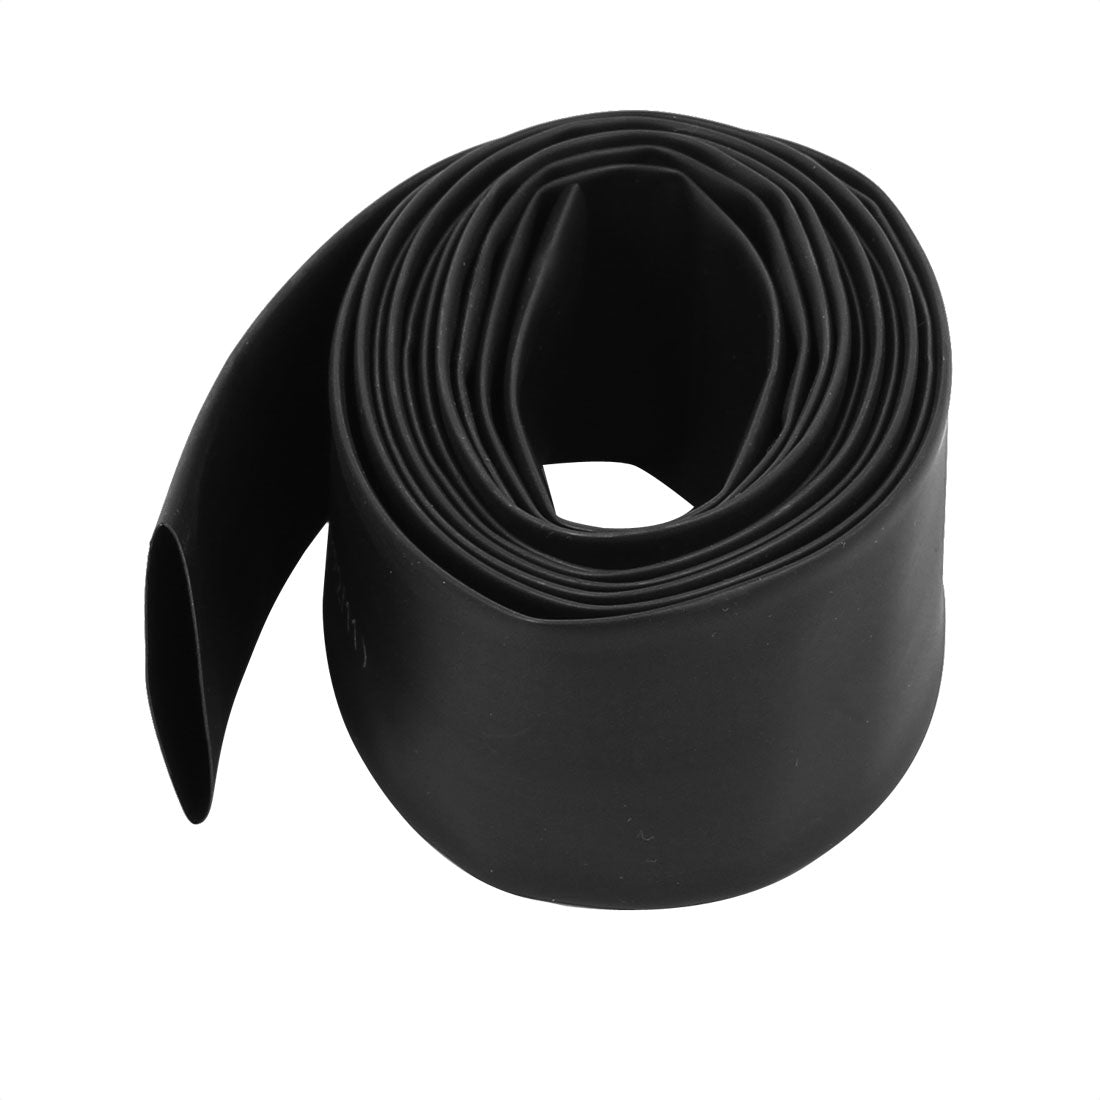 uxcell Uxcell 22mm Dia 2:1 Heat Shrink Tubing Tube Sleeving Wire Cable Black 2M Length